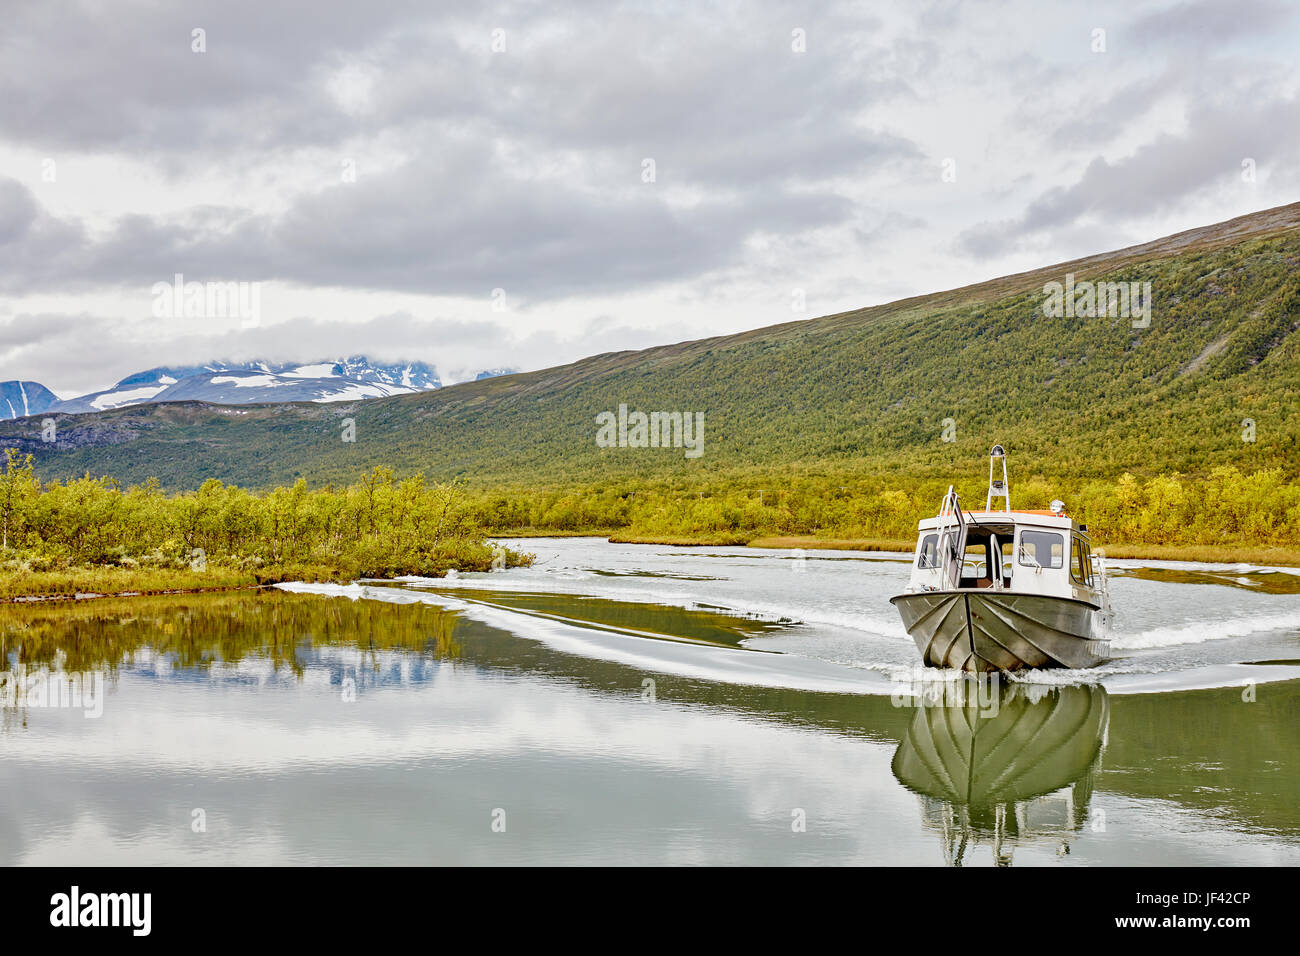 Boat on lake in mountains Stock Photo